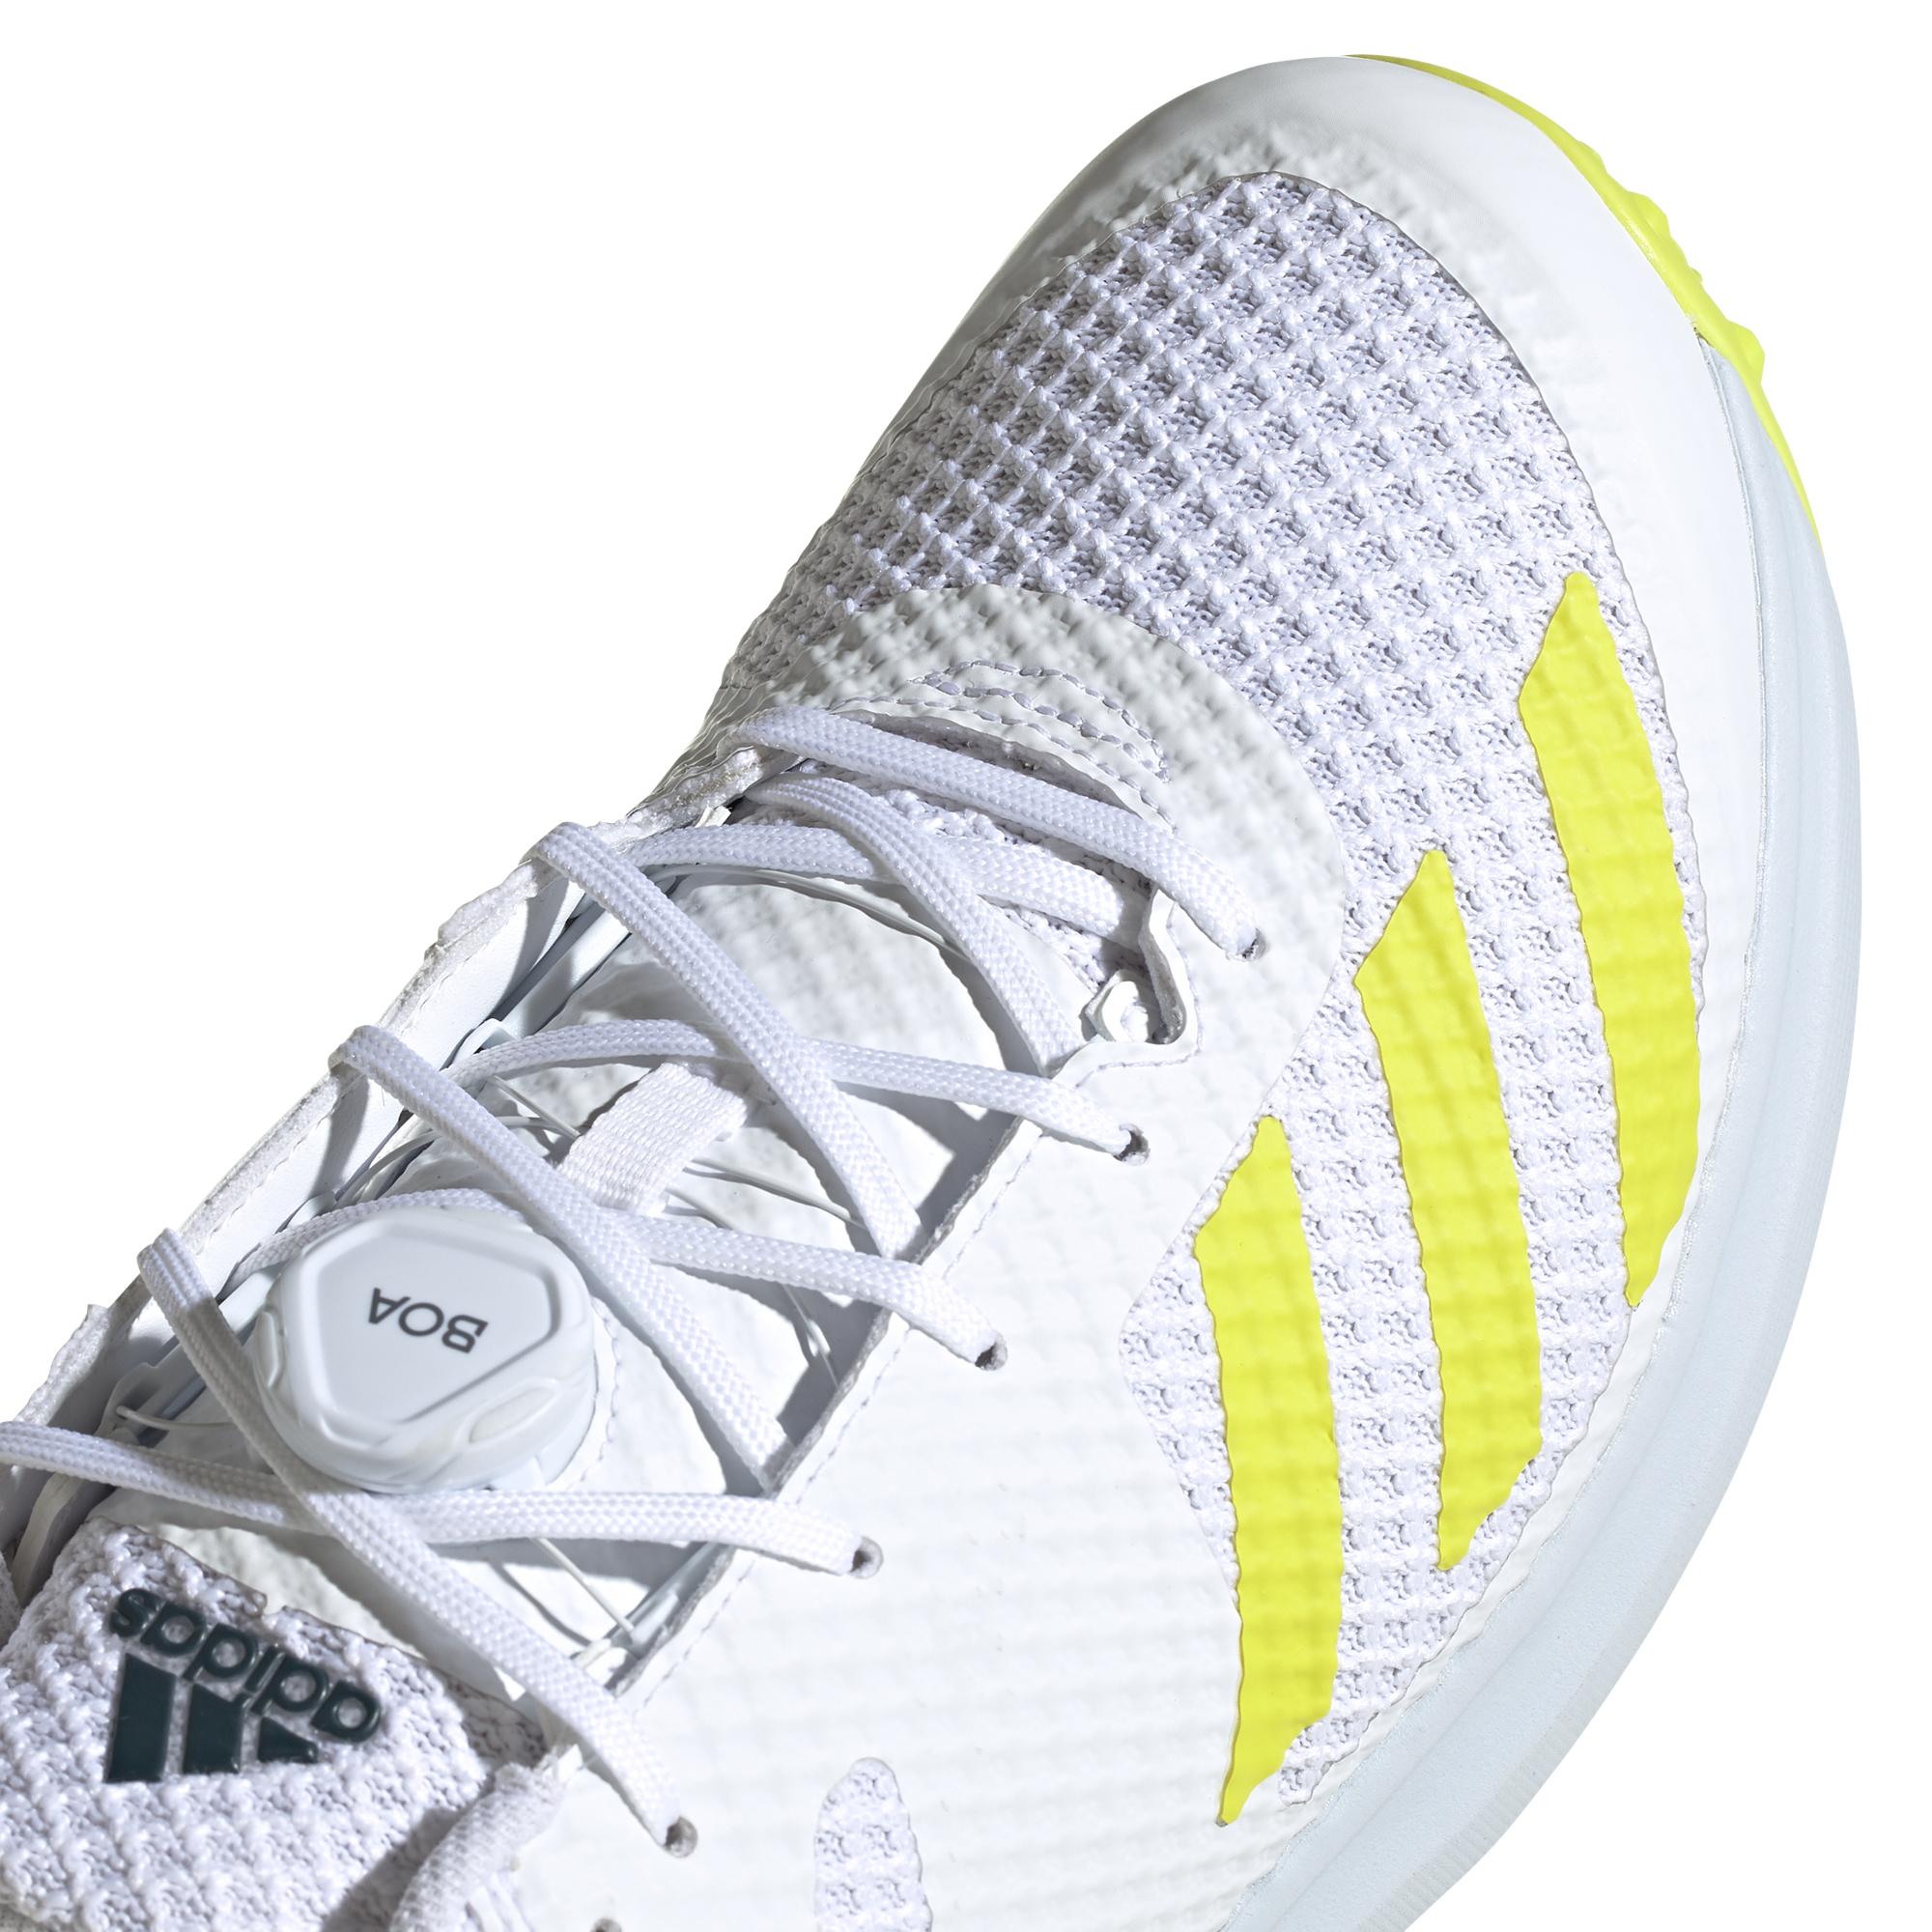 adipower cricket shoes